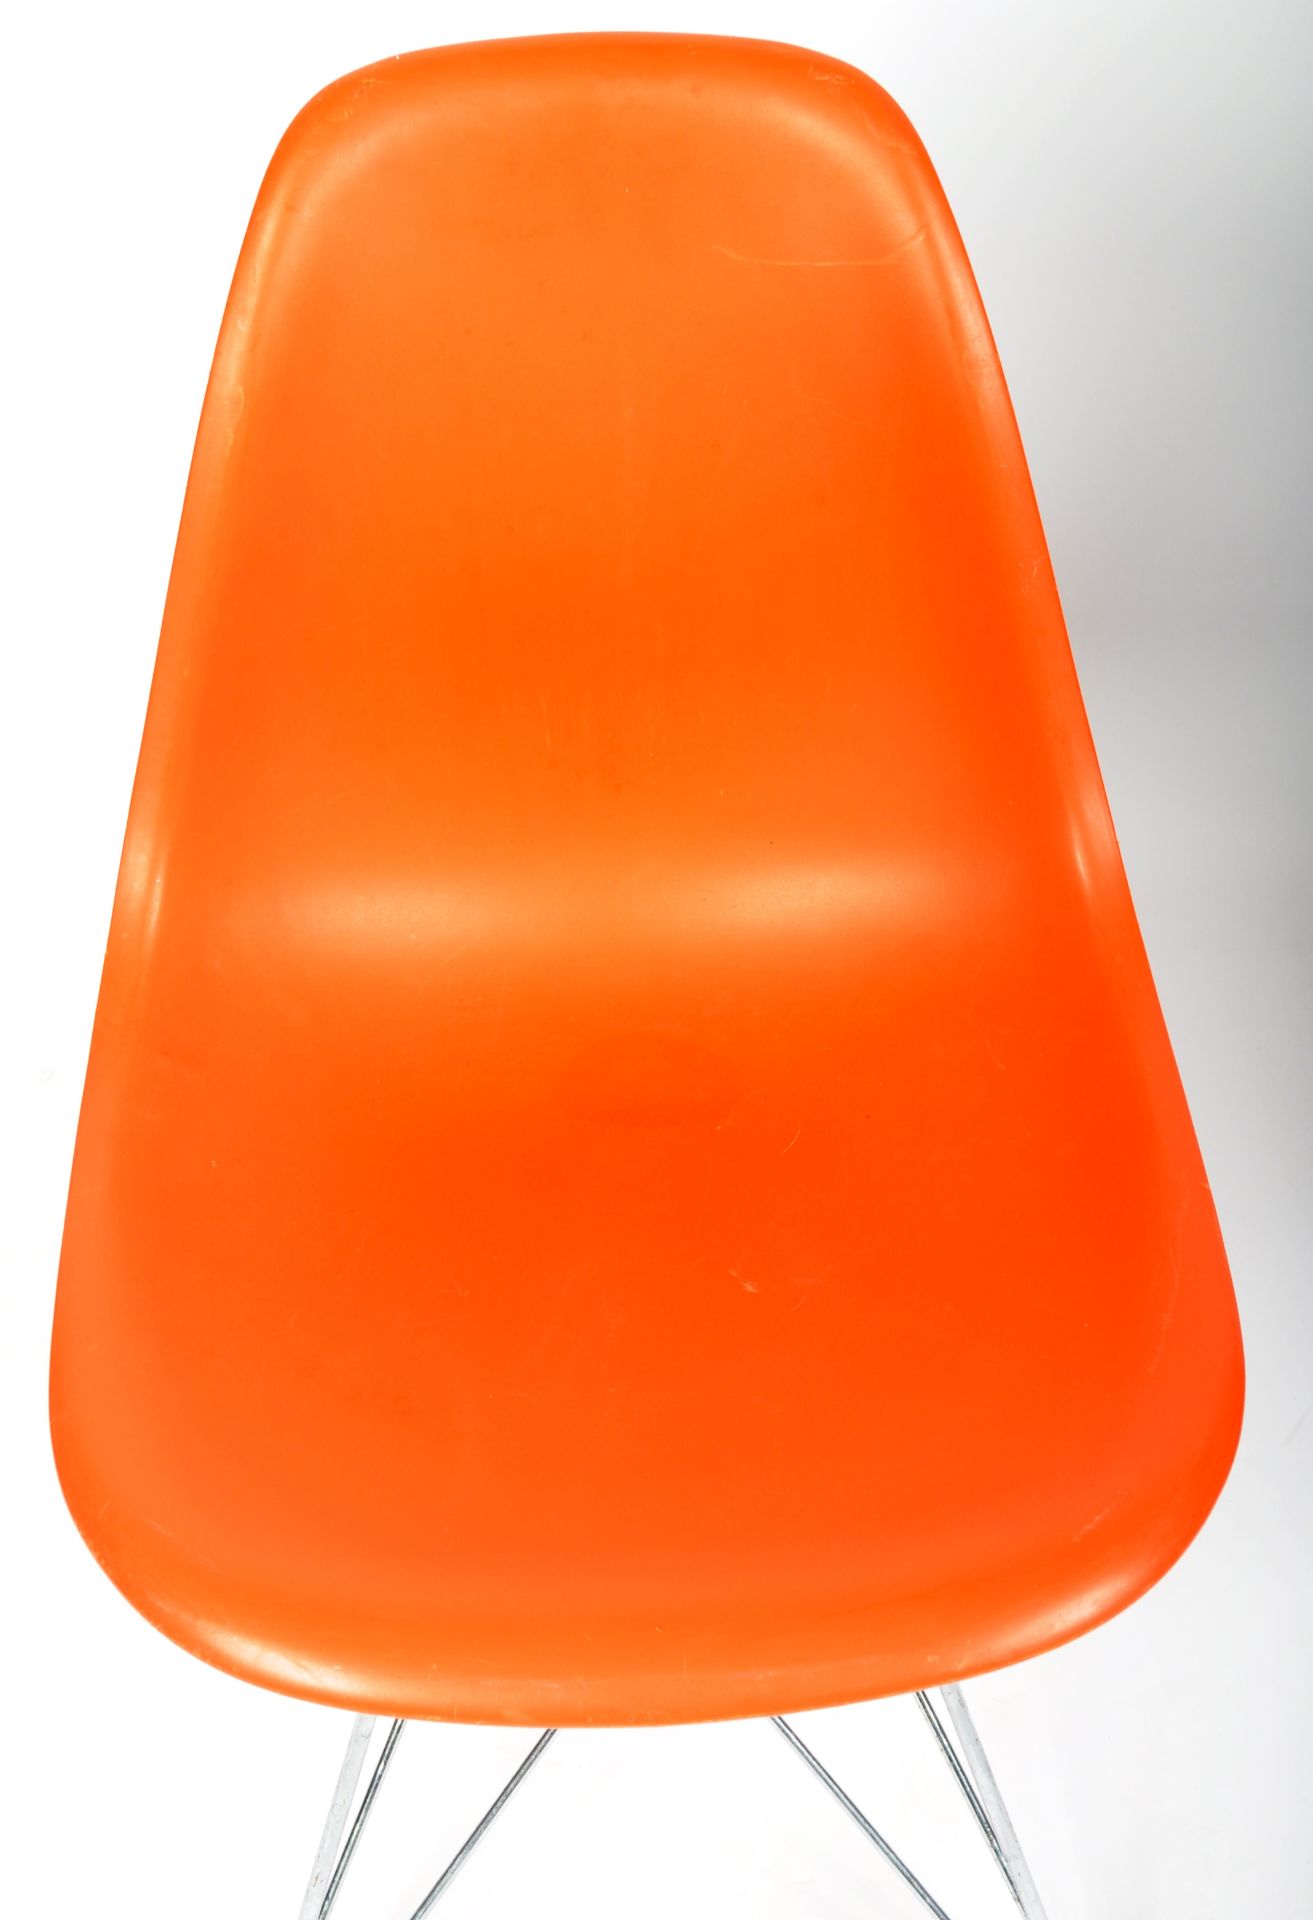 CHARLES & RAY EAMES FOR VITRA - SET OF SIX DSR EAMES PLASTIC CHAIRS - Image 5 of 10